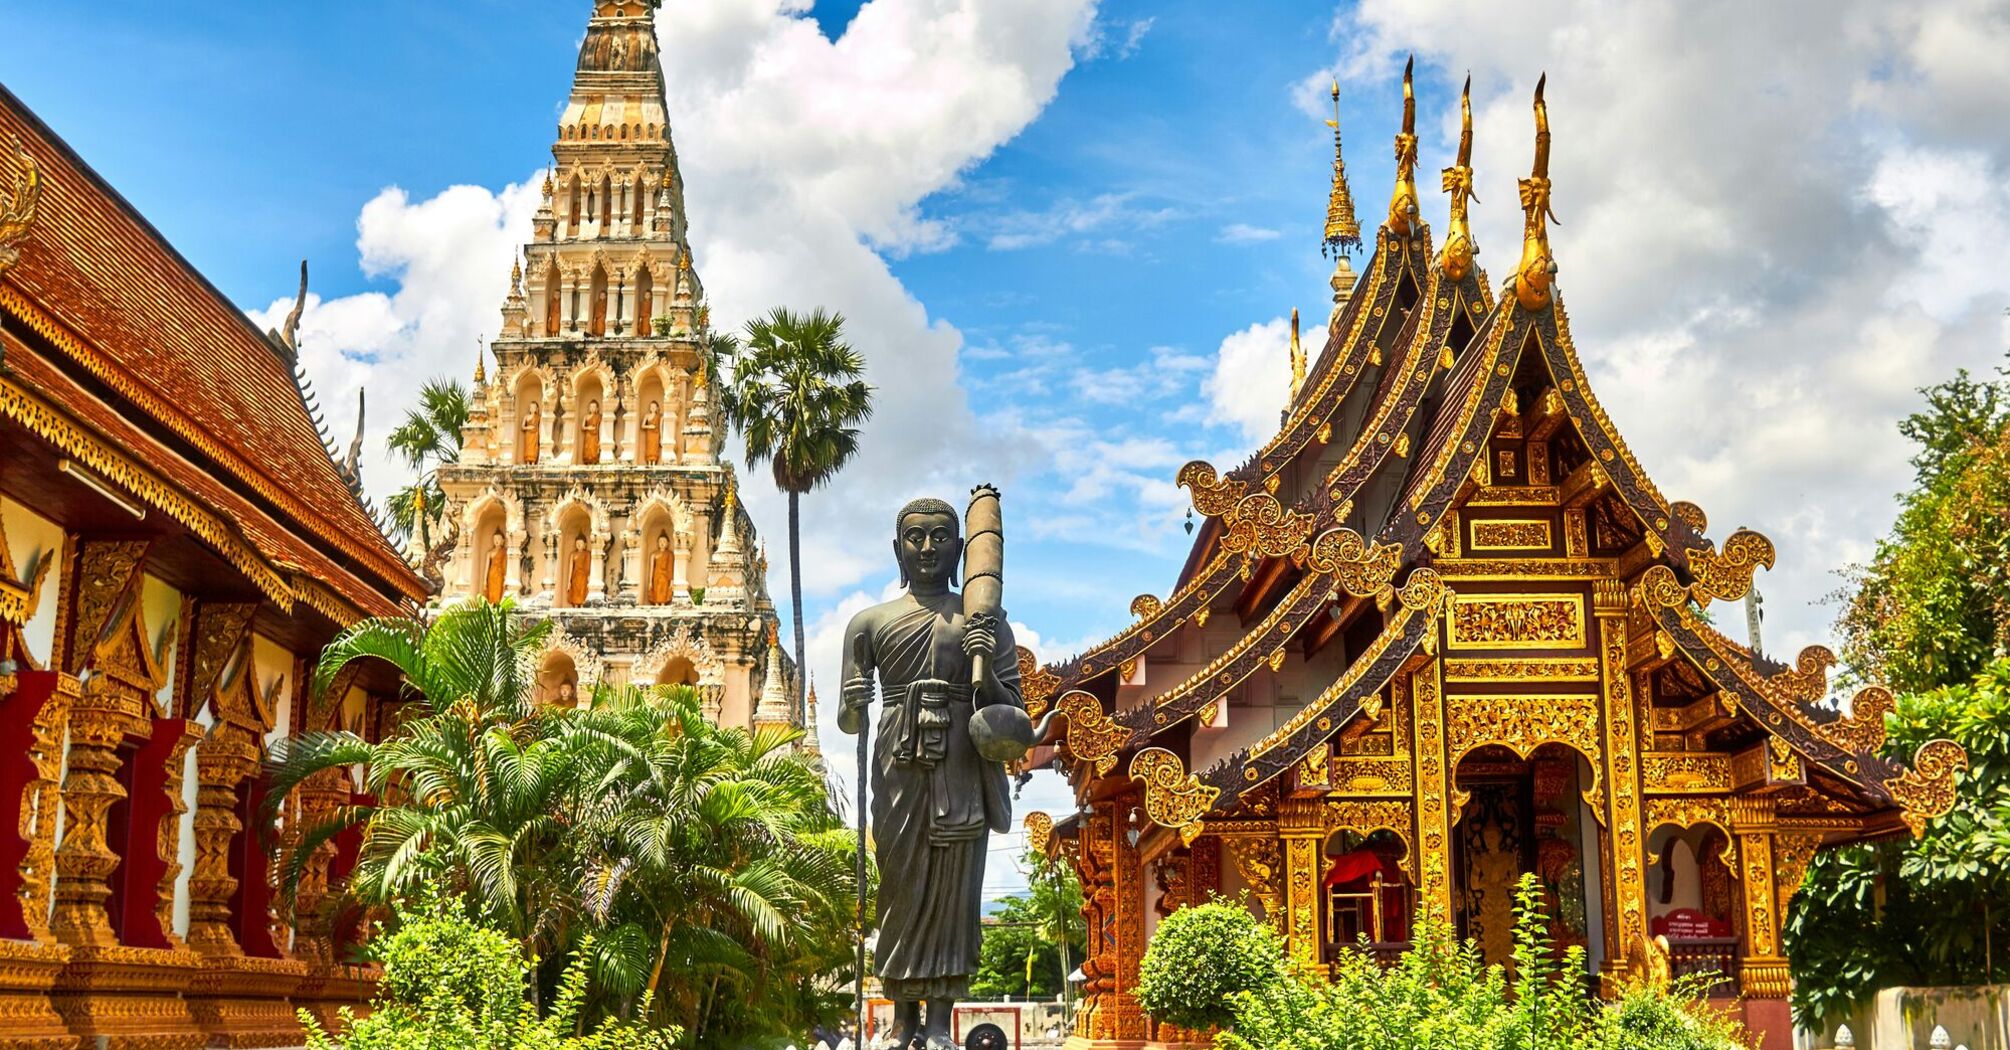 Traditional Thai temple with intricate golden decorations under blue sky